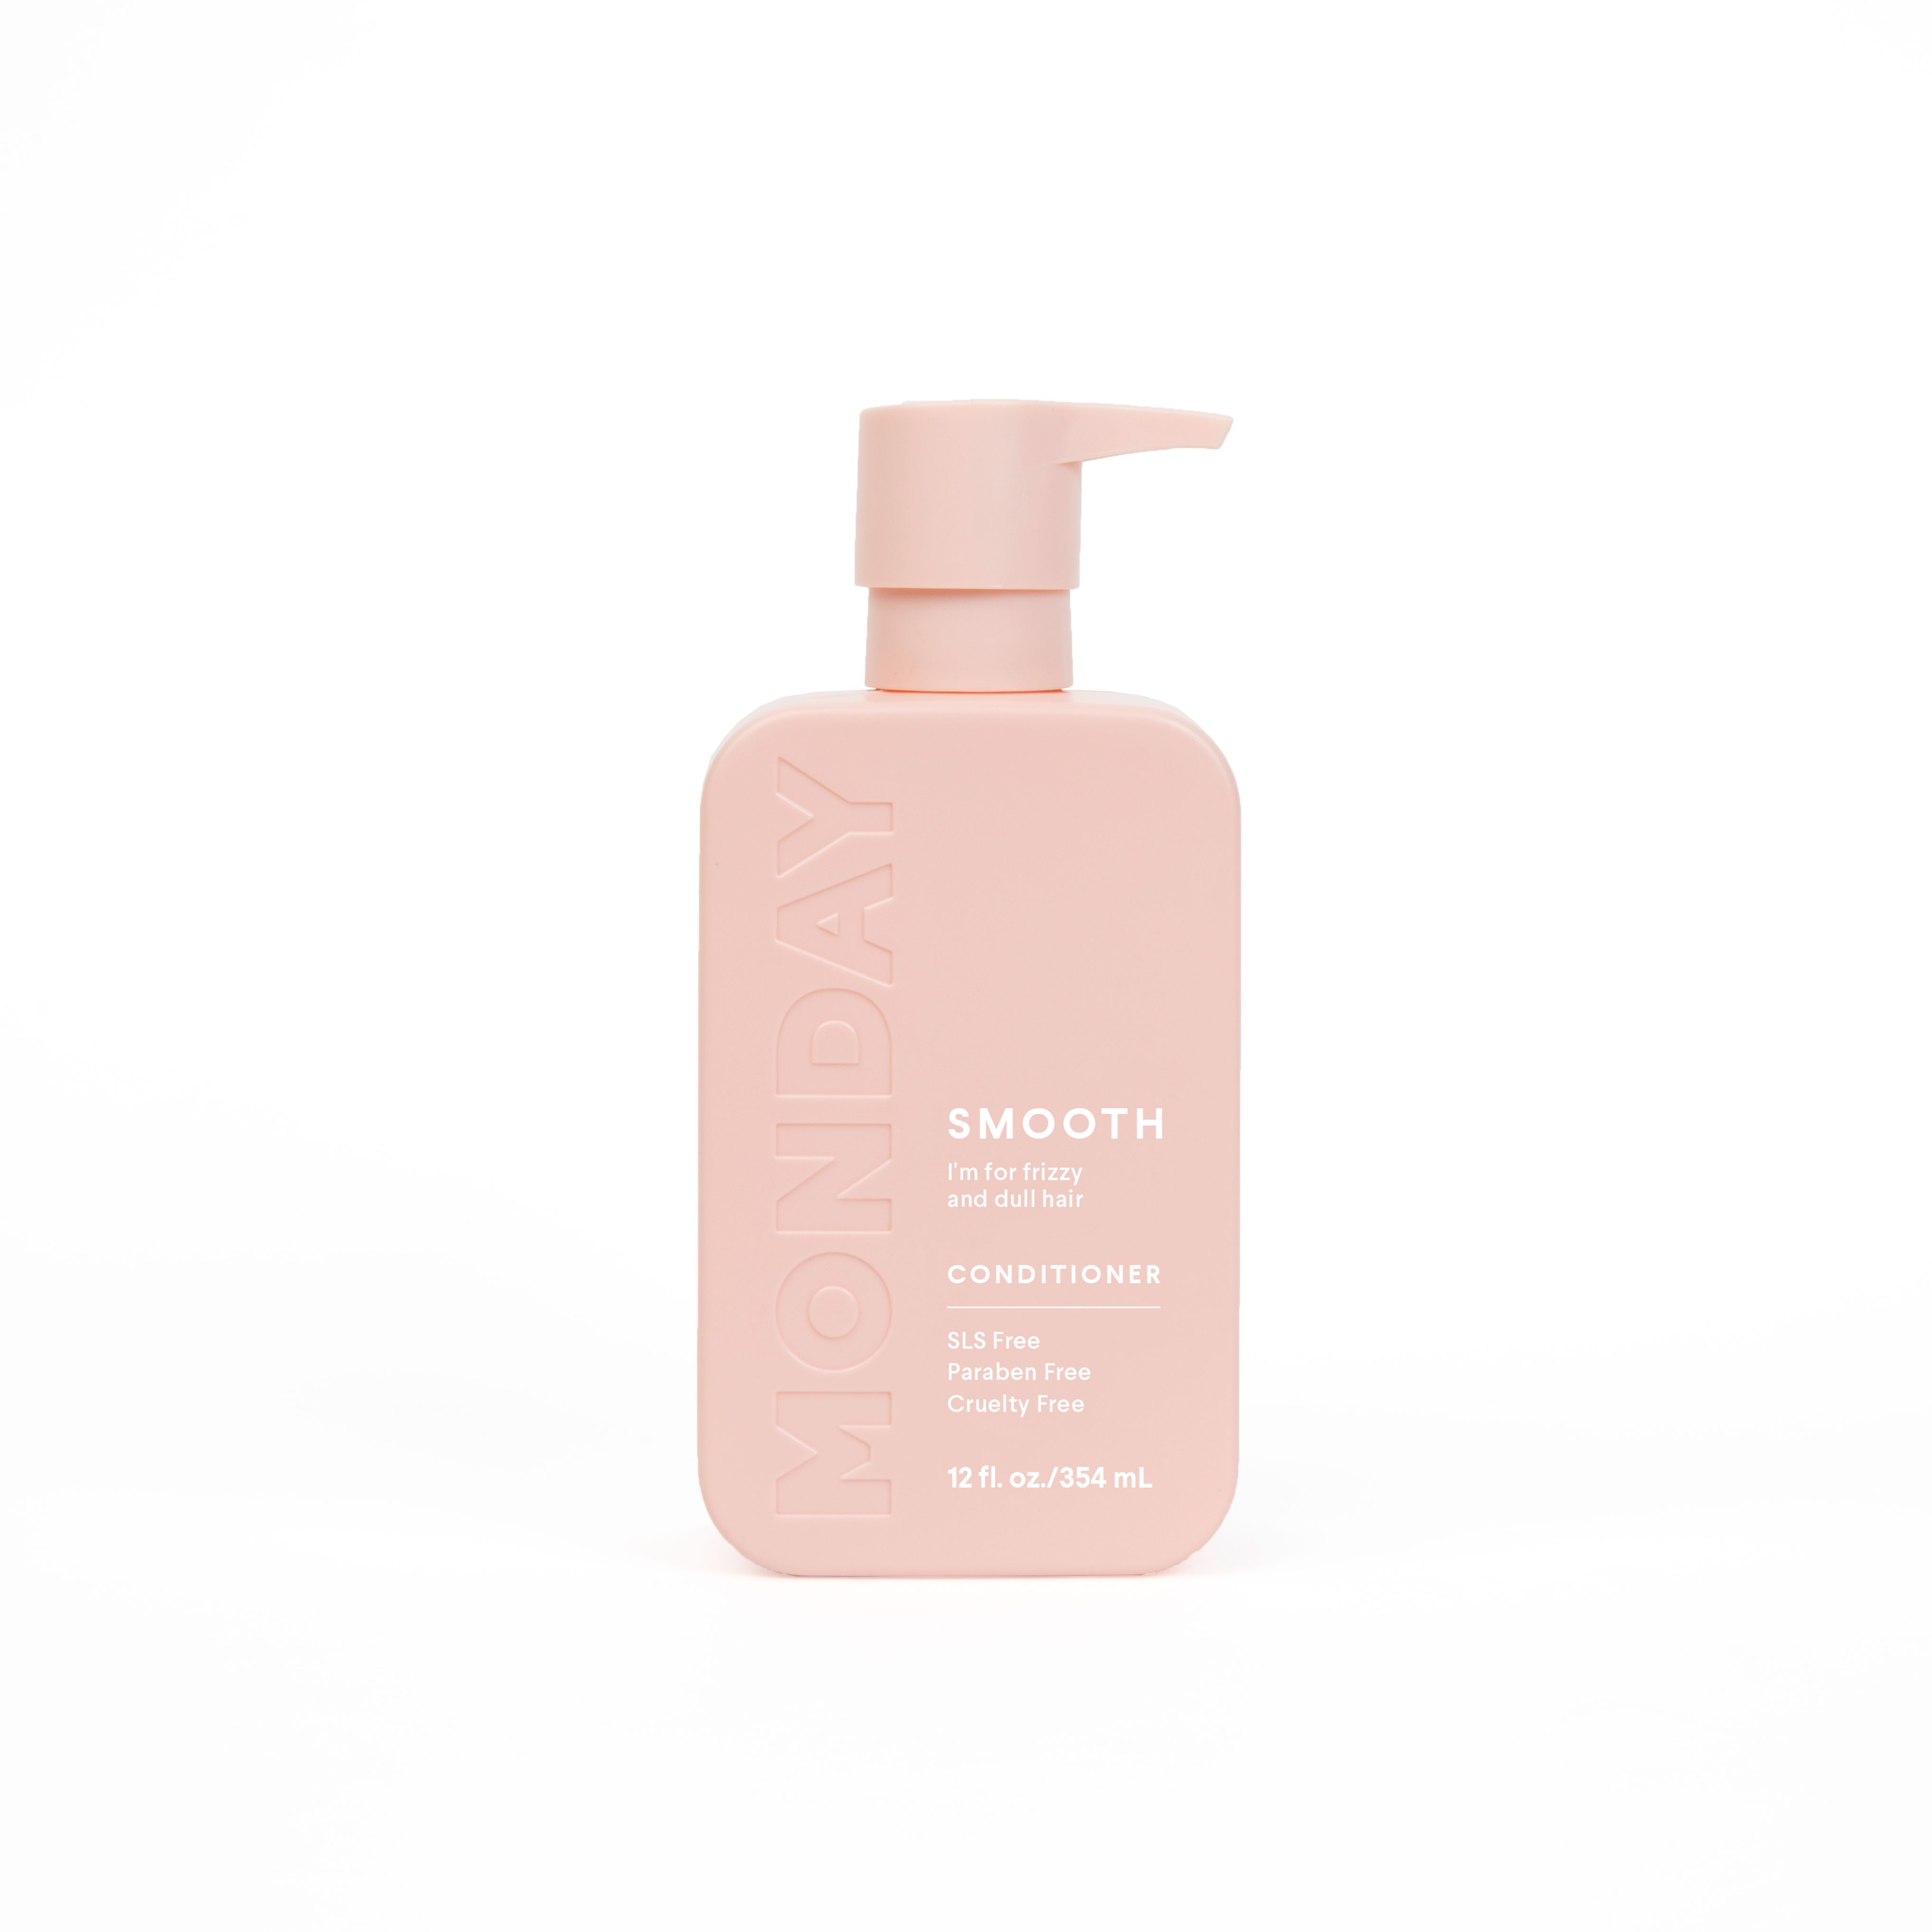 MONDAY Haircare SMOOTH Conditioner Sulfate- and Paraben-Free 354ml (12oz) | Walmart (US)